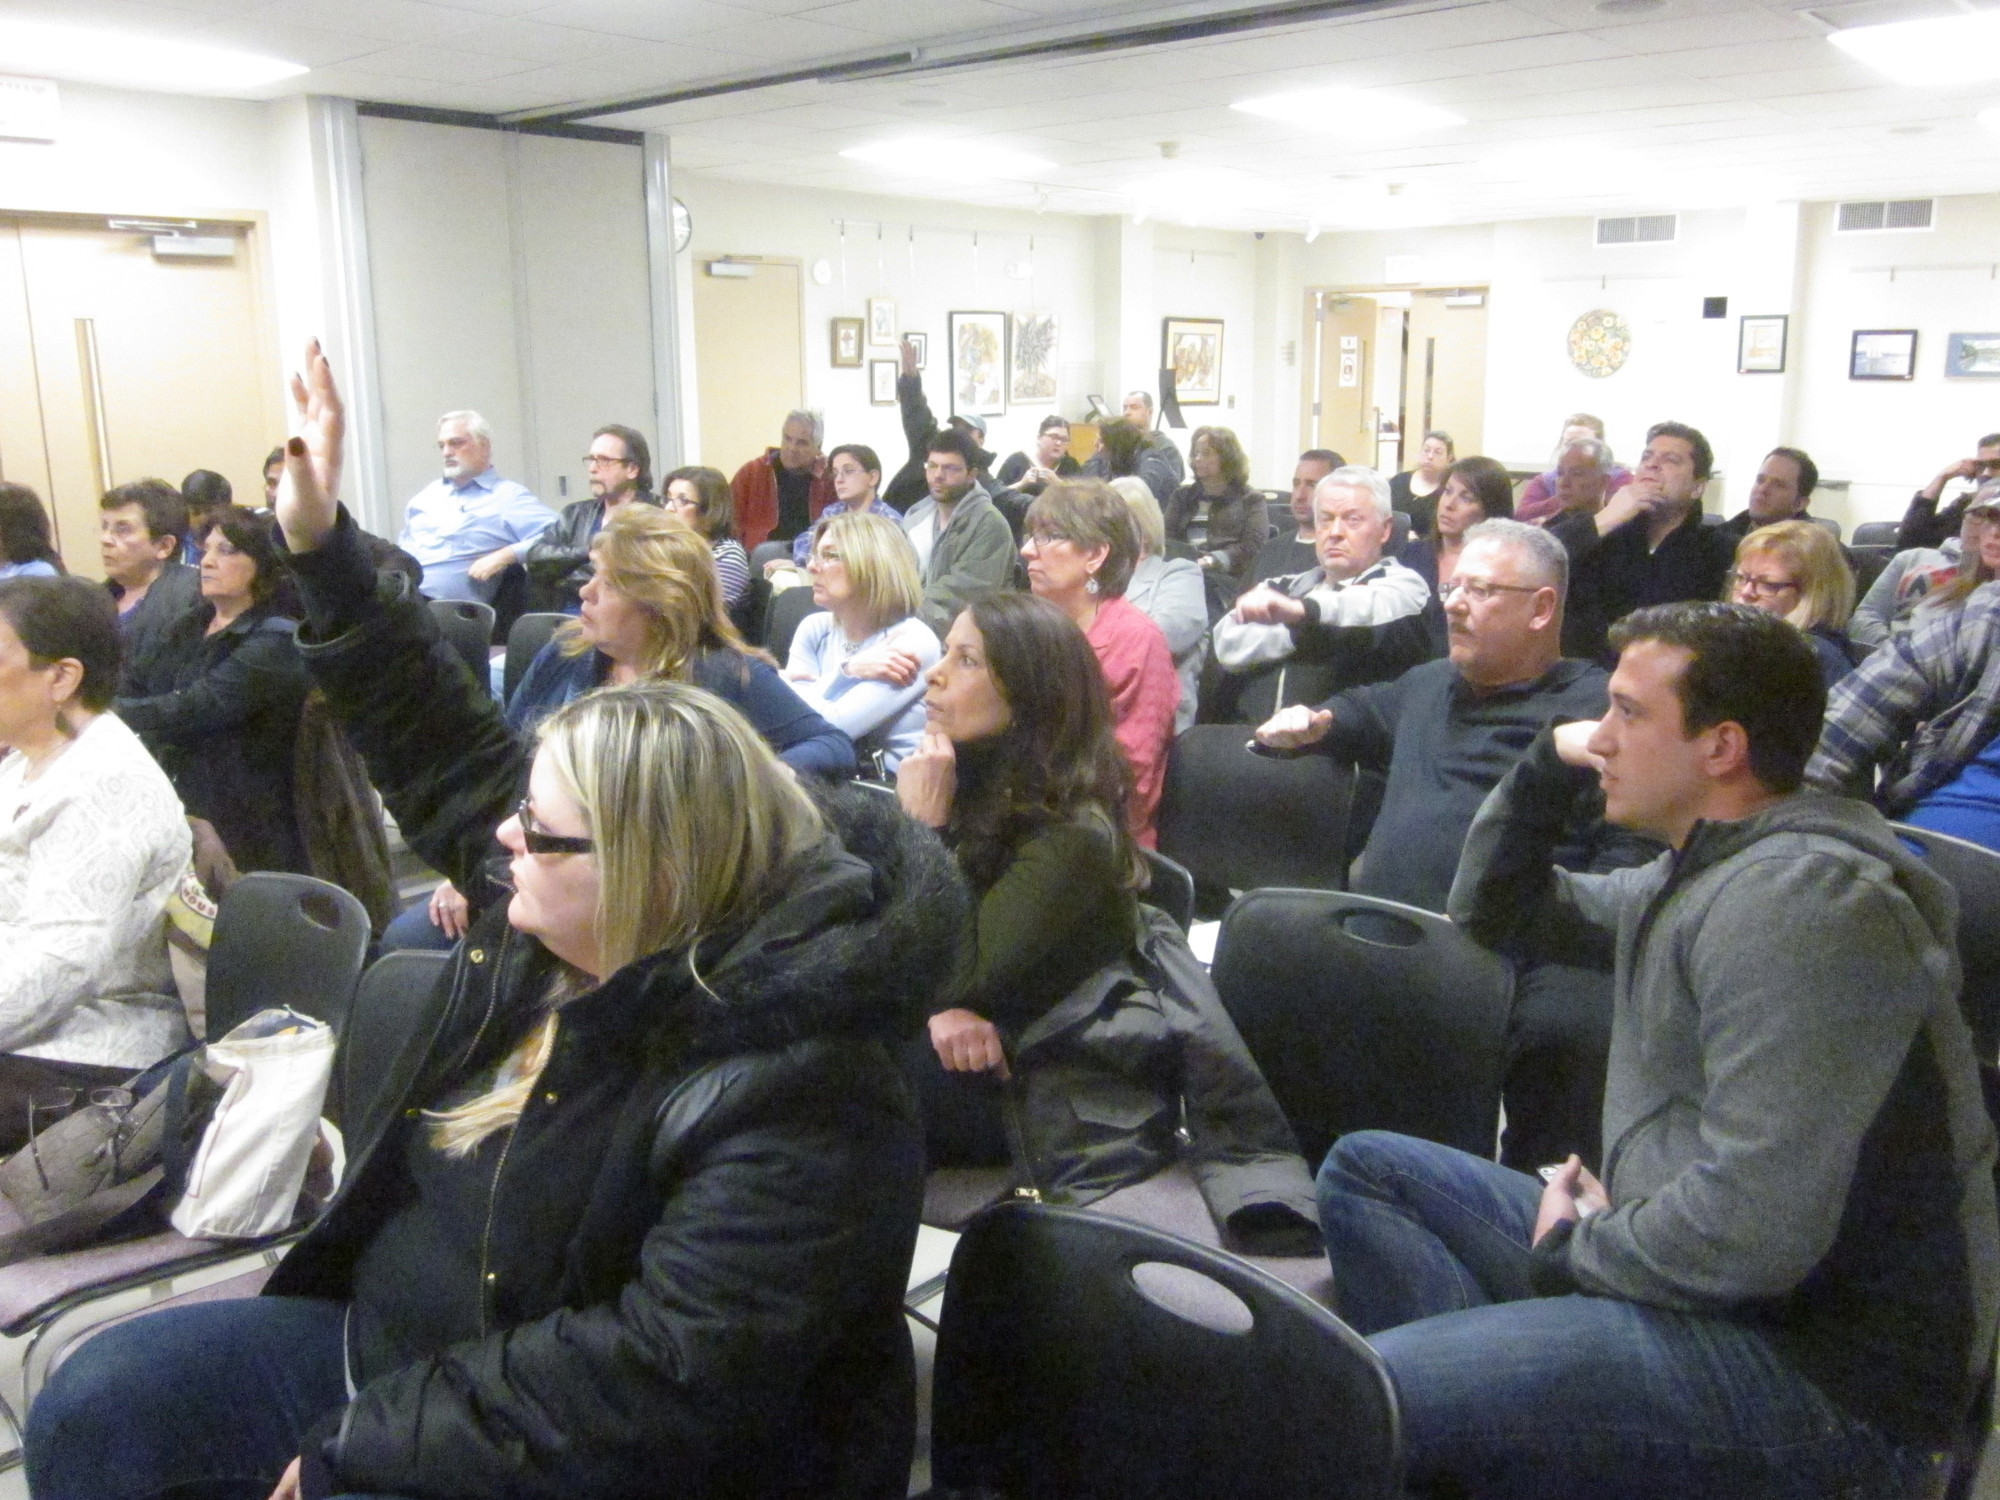 About 40 residents attended a community meeting at the East Meadow Public Library on Jan. 22 to register their opposition to a proposed Taco Bell restaurant at 1939 Hempstead Turnpike.